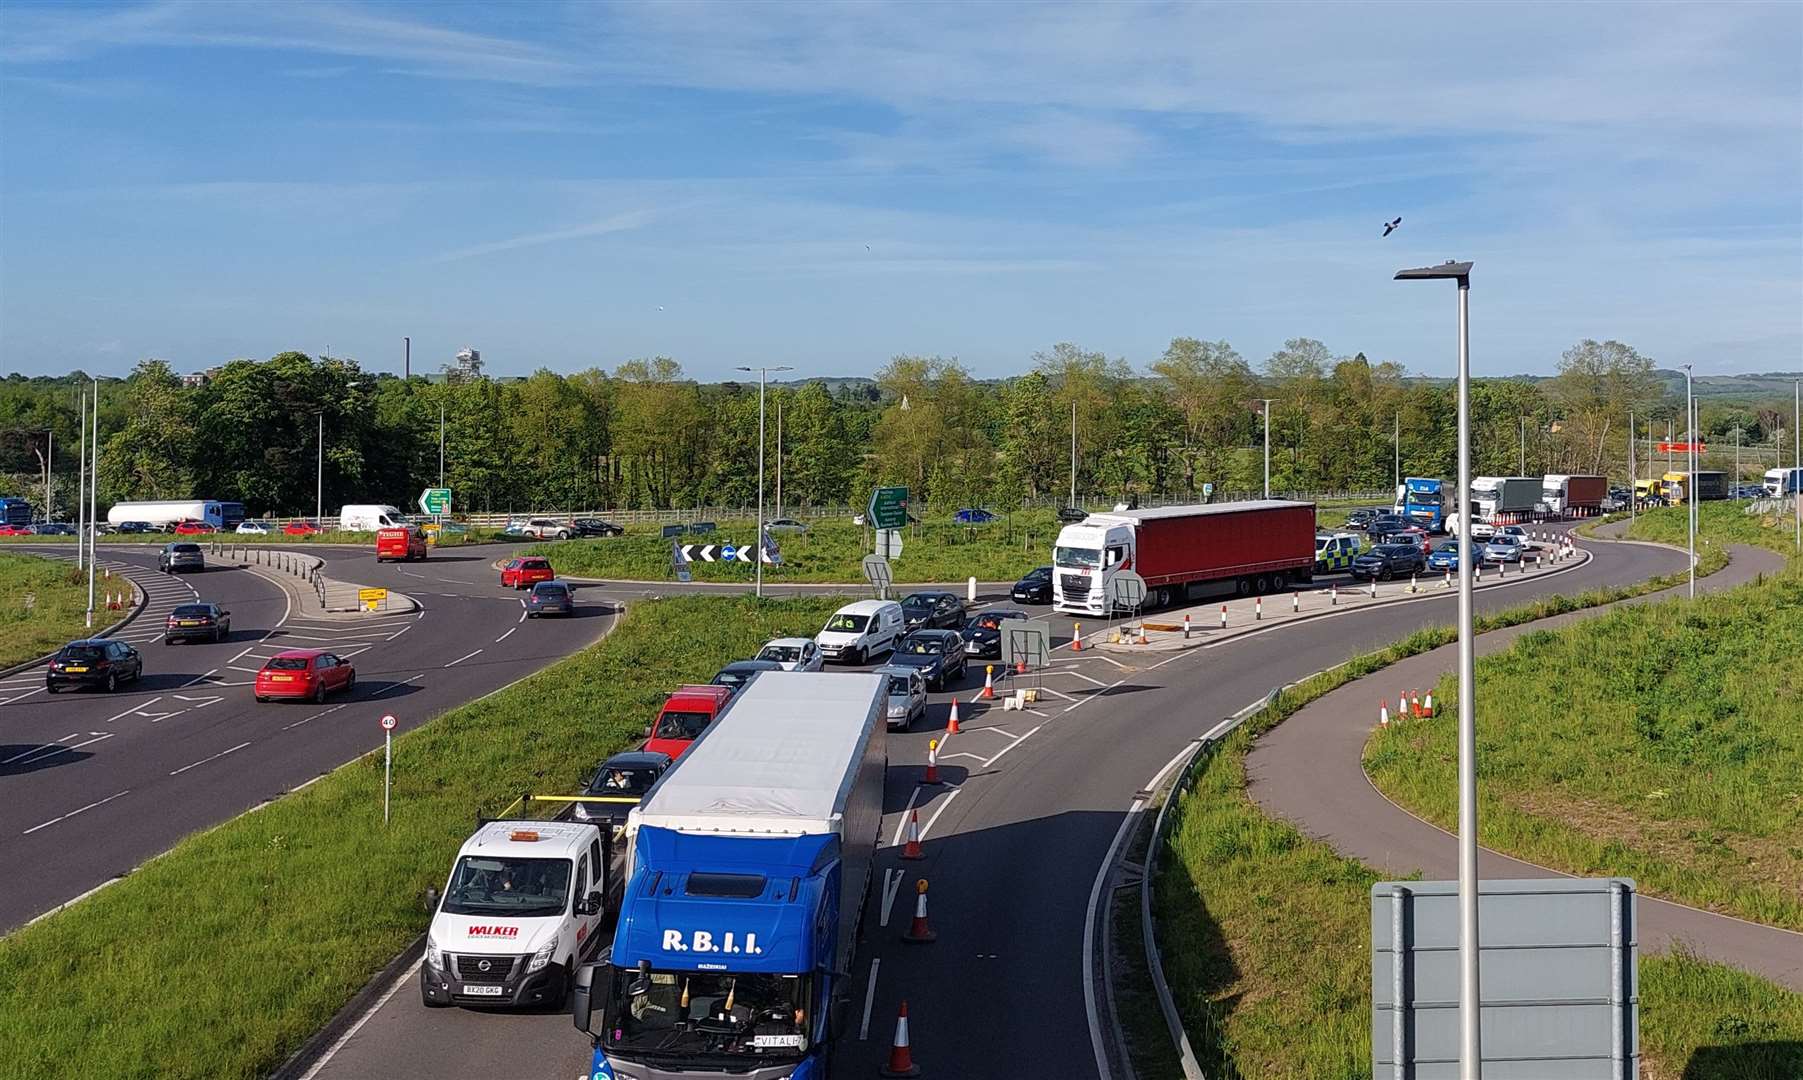 Huge tailbacks occurred when the restrictions were first introduced on the A2070 – and have continued for months